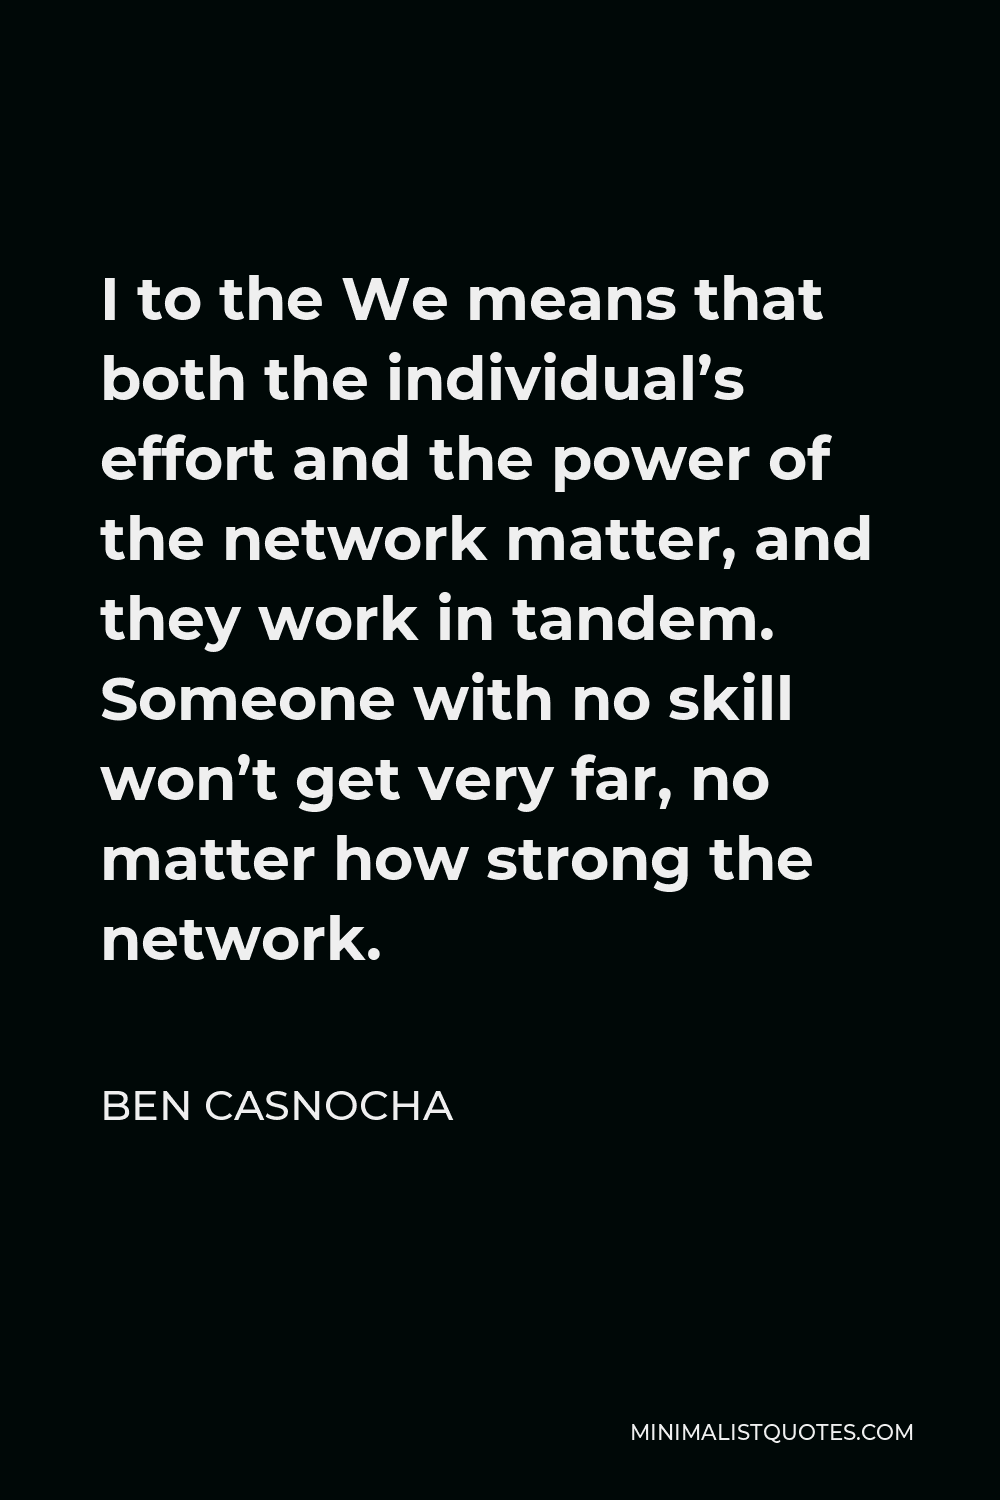 Ben Casnocha Quote - I to the We means that both the individual’s effort and the power of the network matter, and they work in tandem. Someone with no skill won’t get very far, no matter how strong the network.